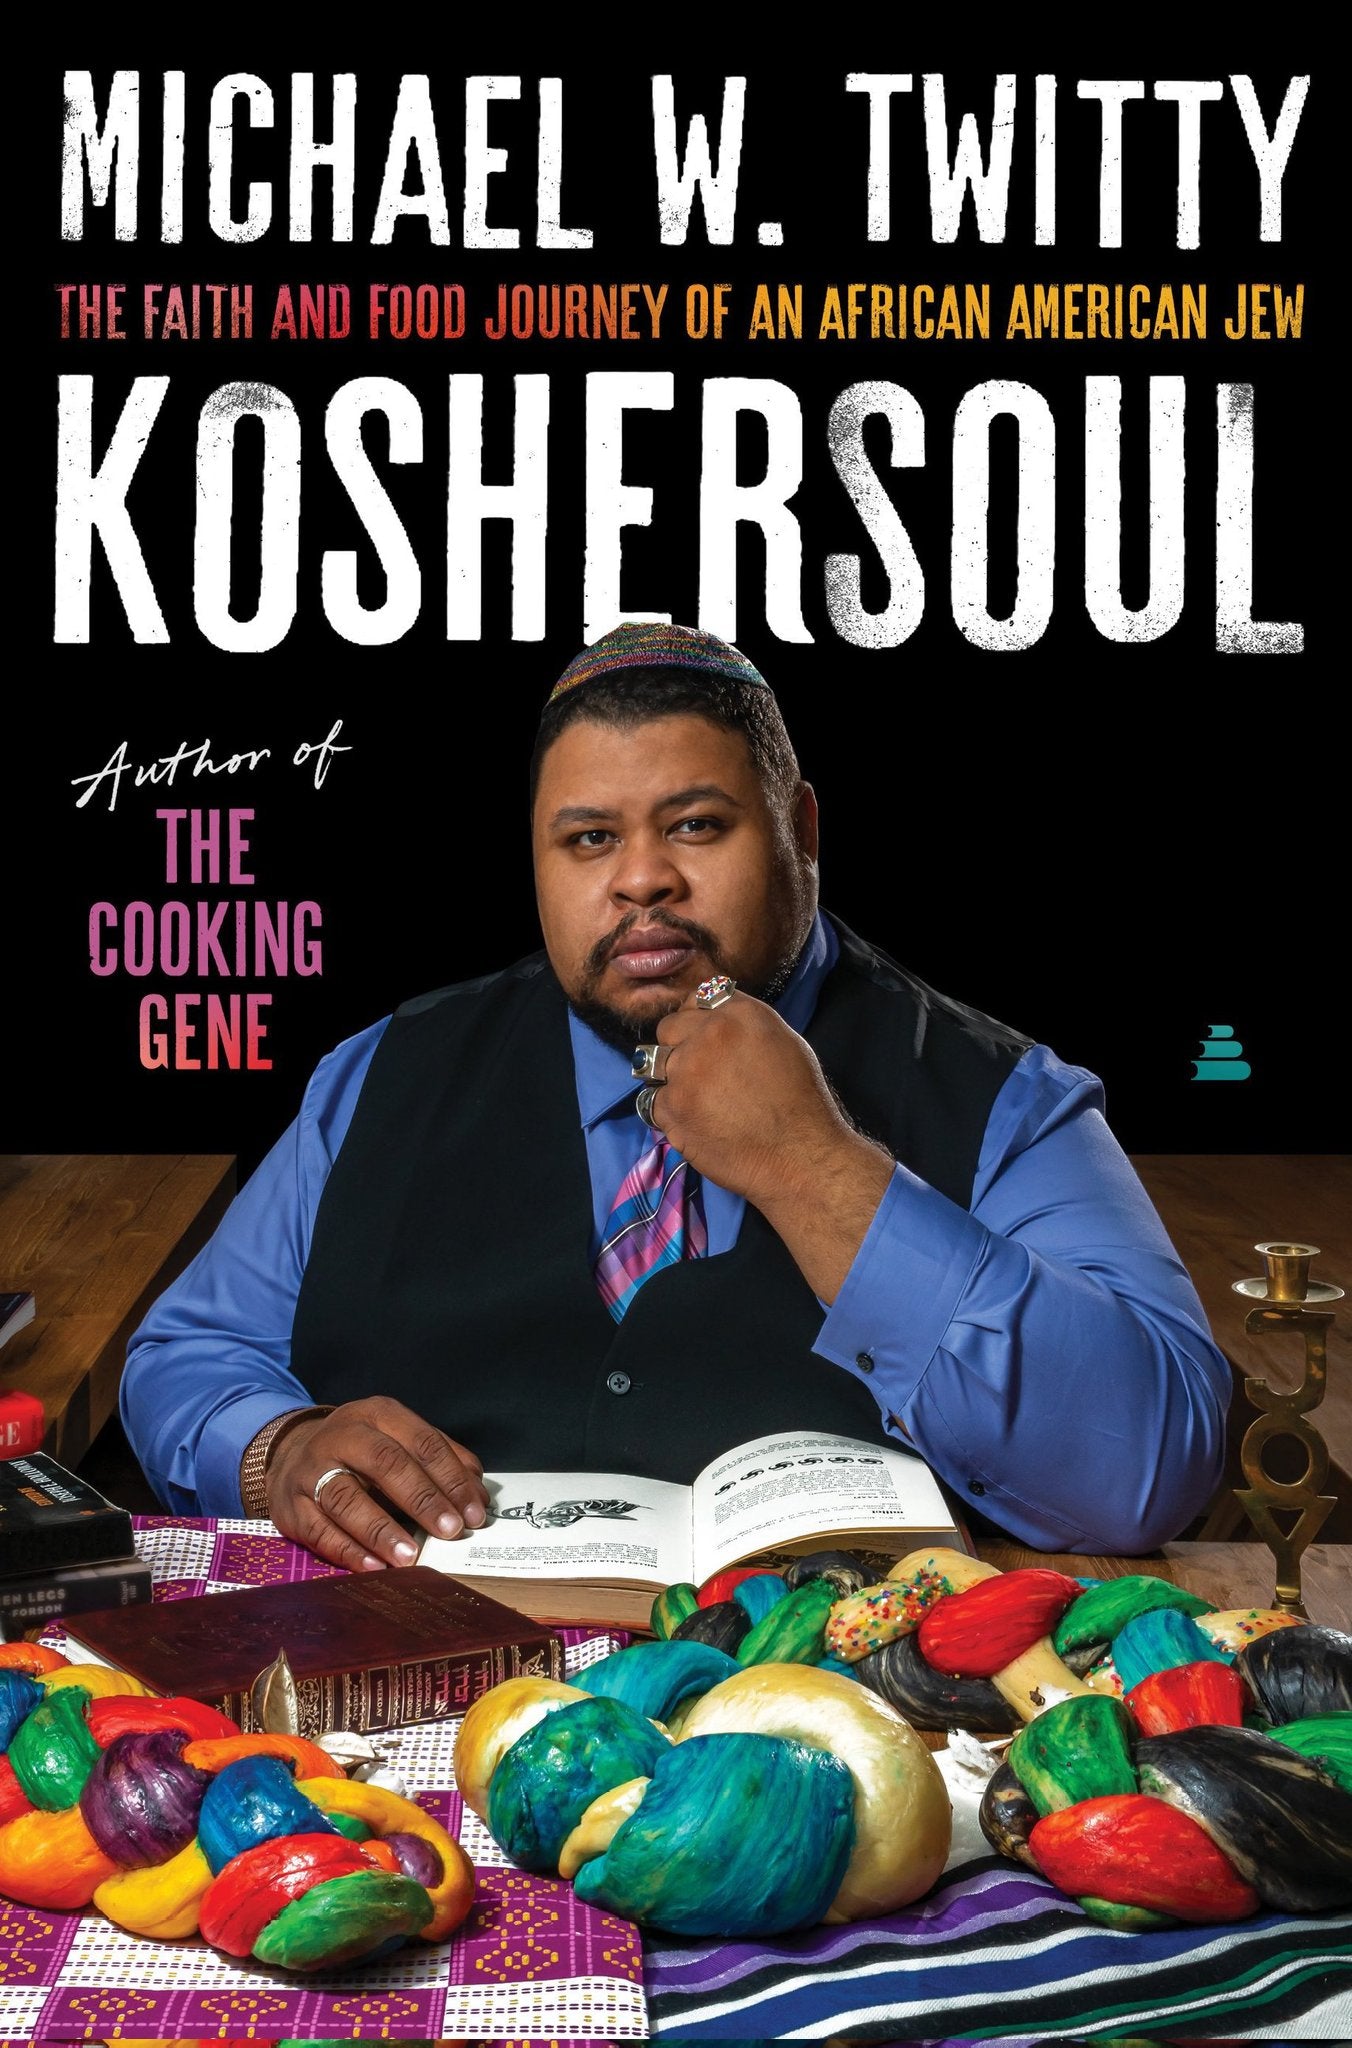 Koshersoul: The Faith and Food Journey of an African American Jew (Michael Twitty) *Signed*